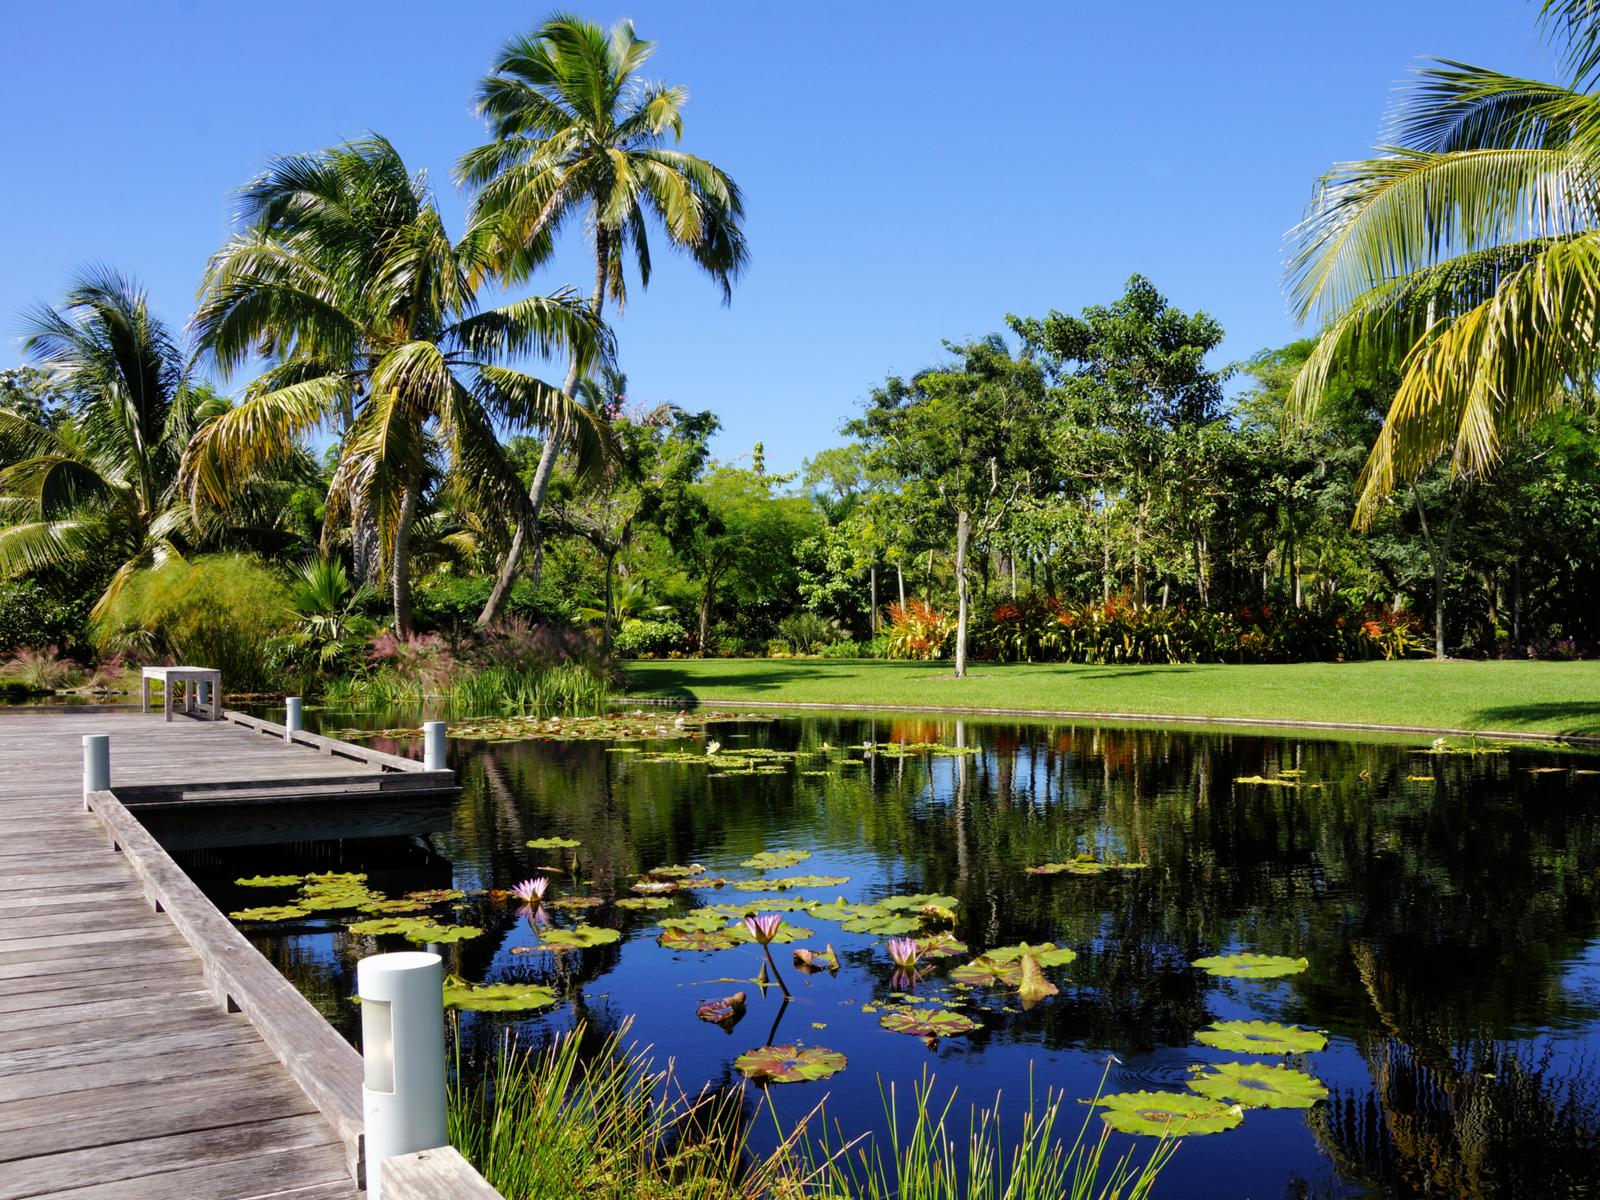 Gorgeous view of the Naples Botanical Garden, one of the best things to do in South Florida, from the walking path